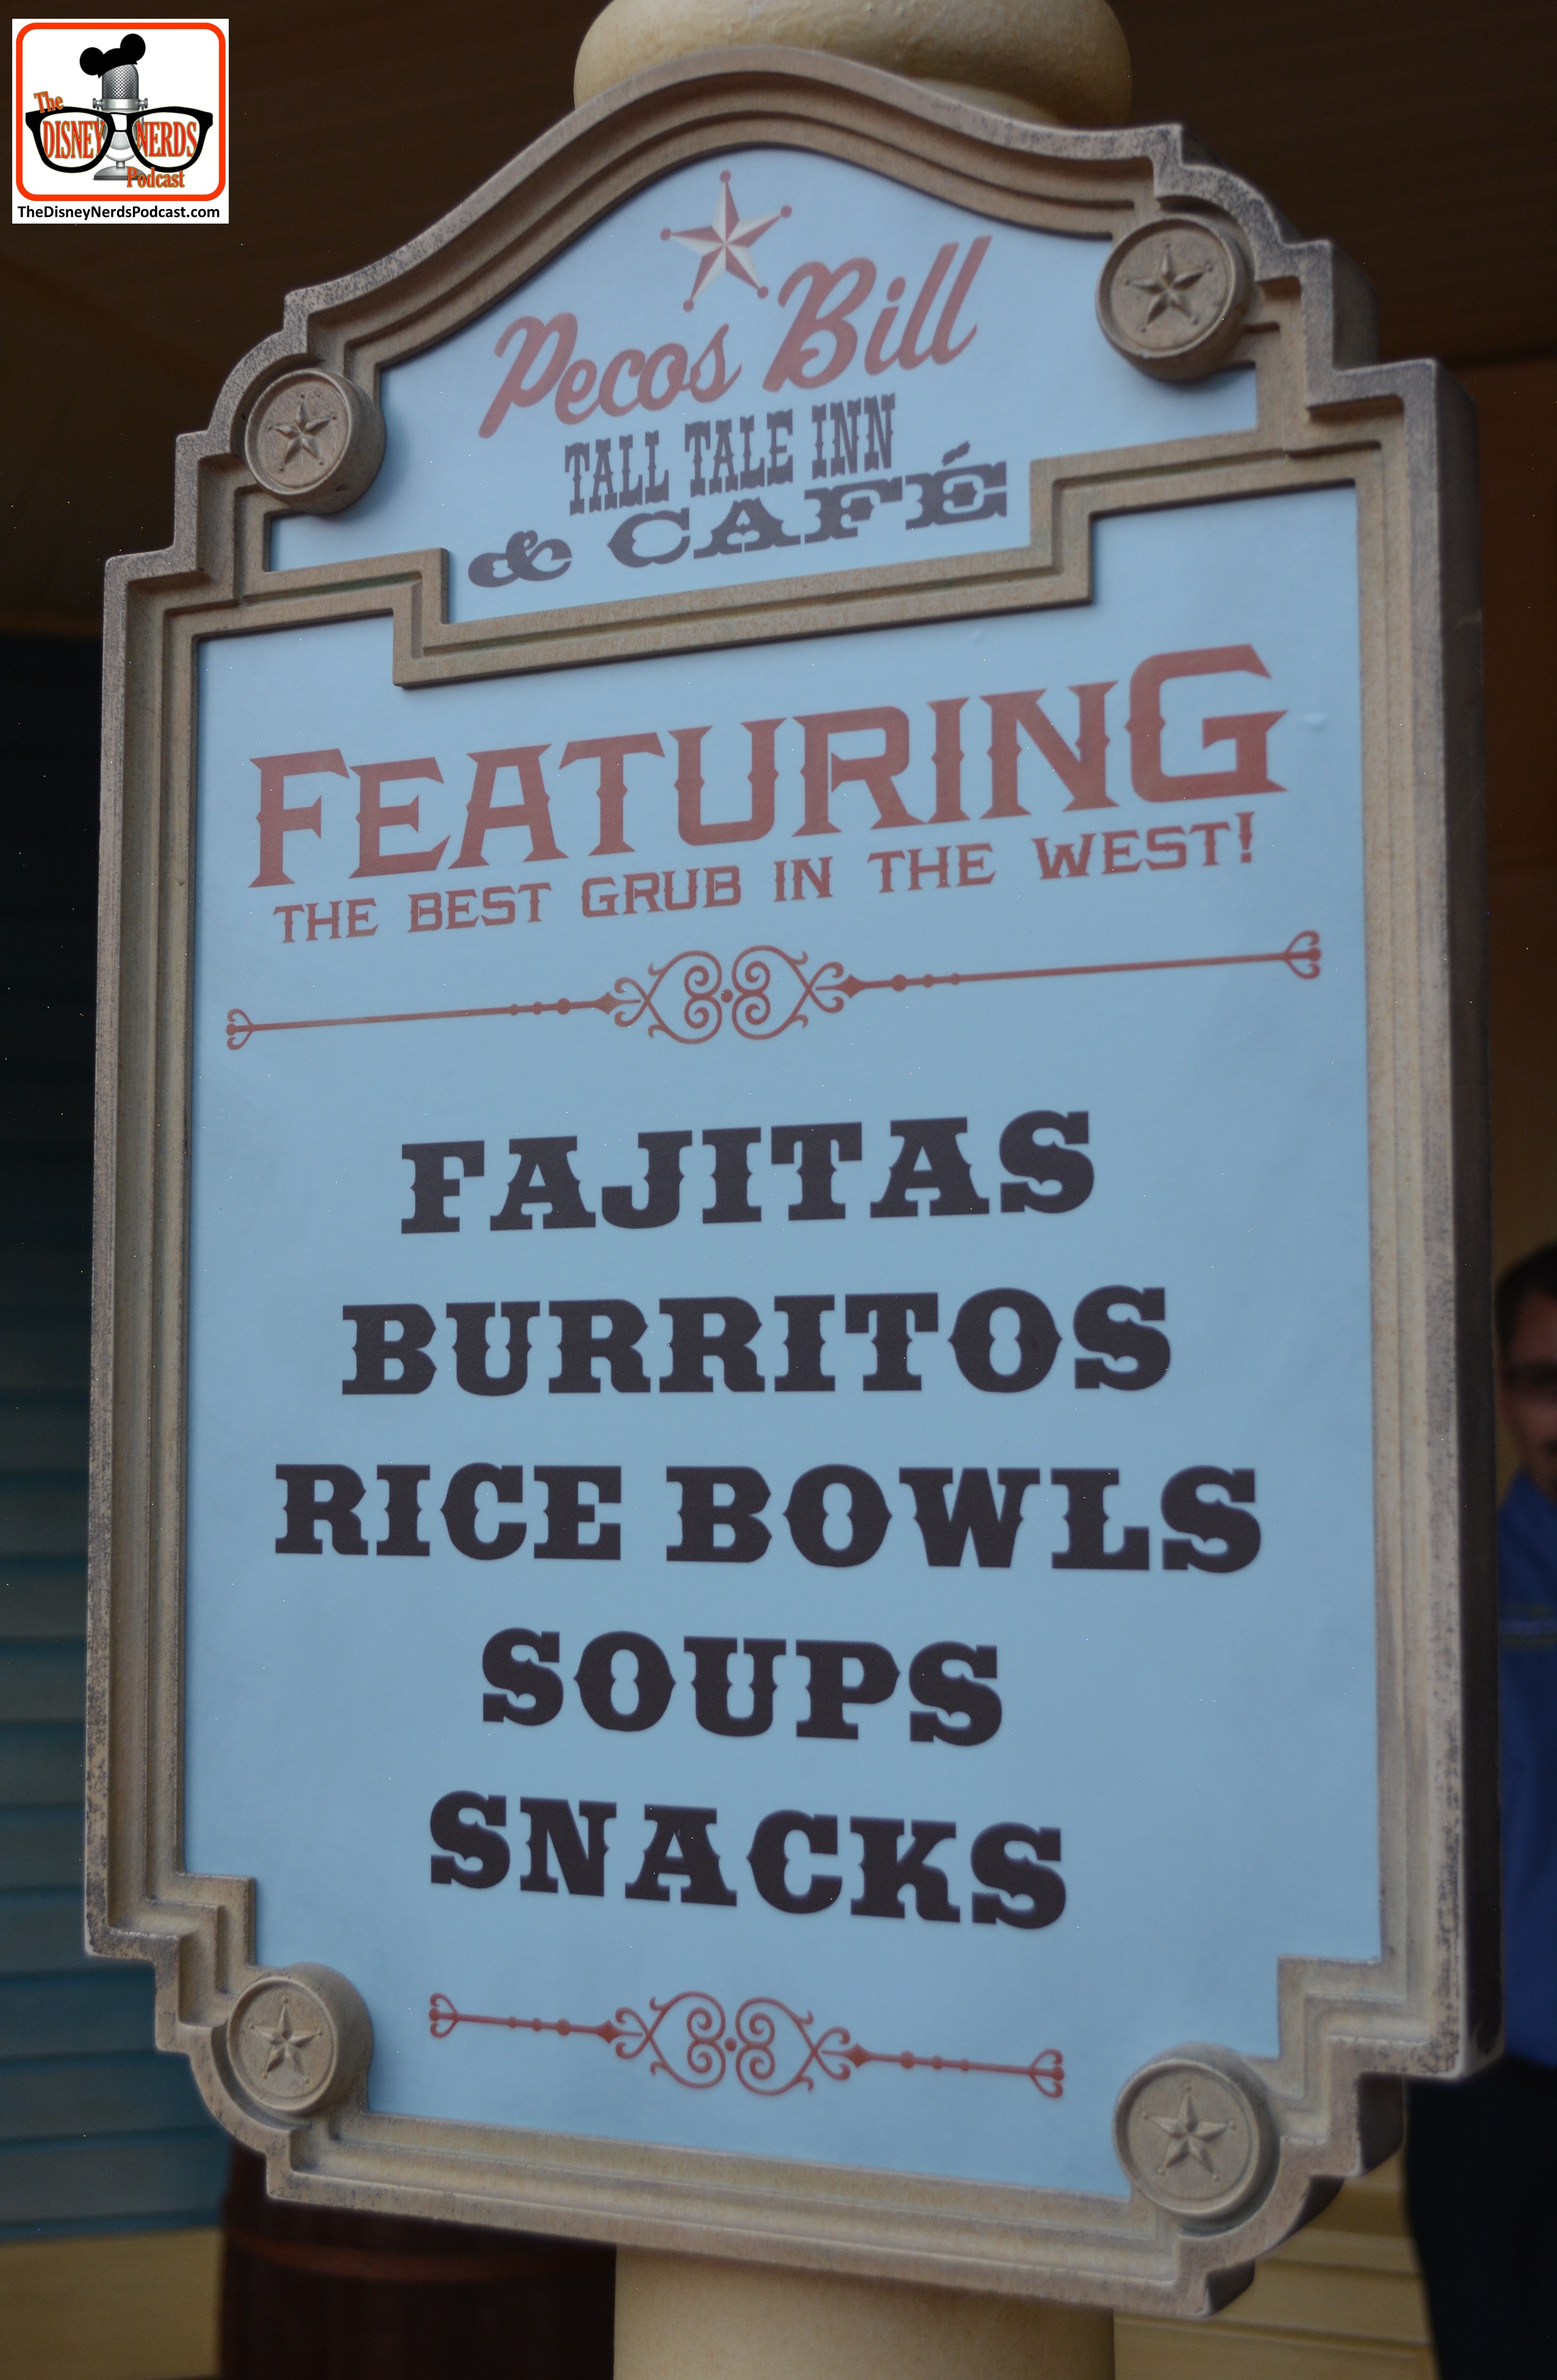 No More Burgers at Pecos Bill's - Now featuring the Best of the West. Fajitas, Burritos, Rice Bowls Soups and Snacks.